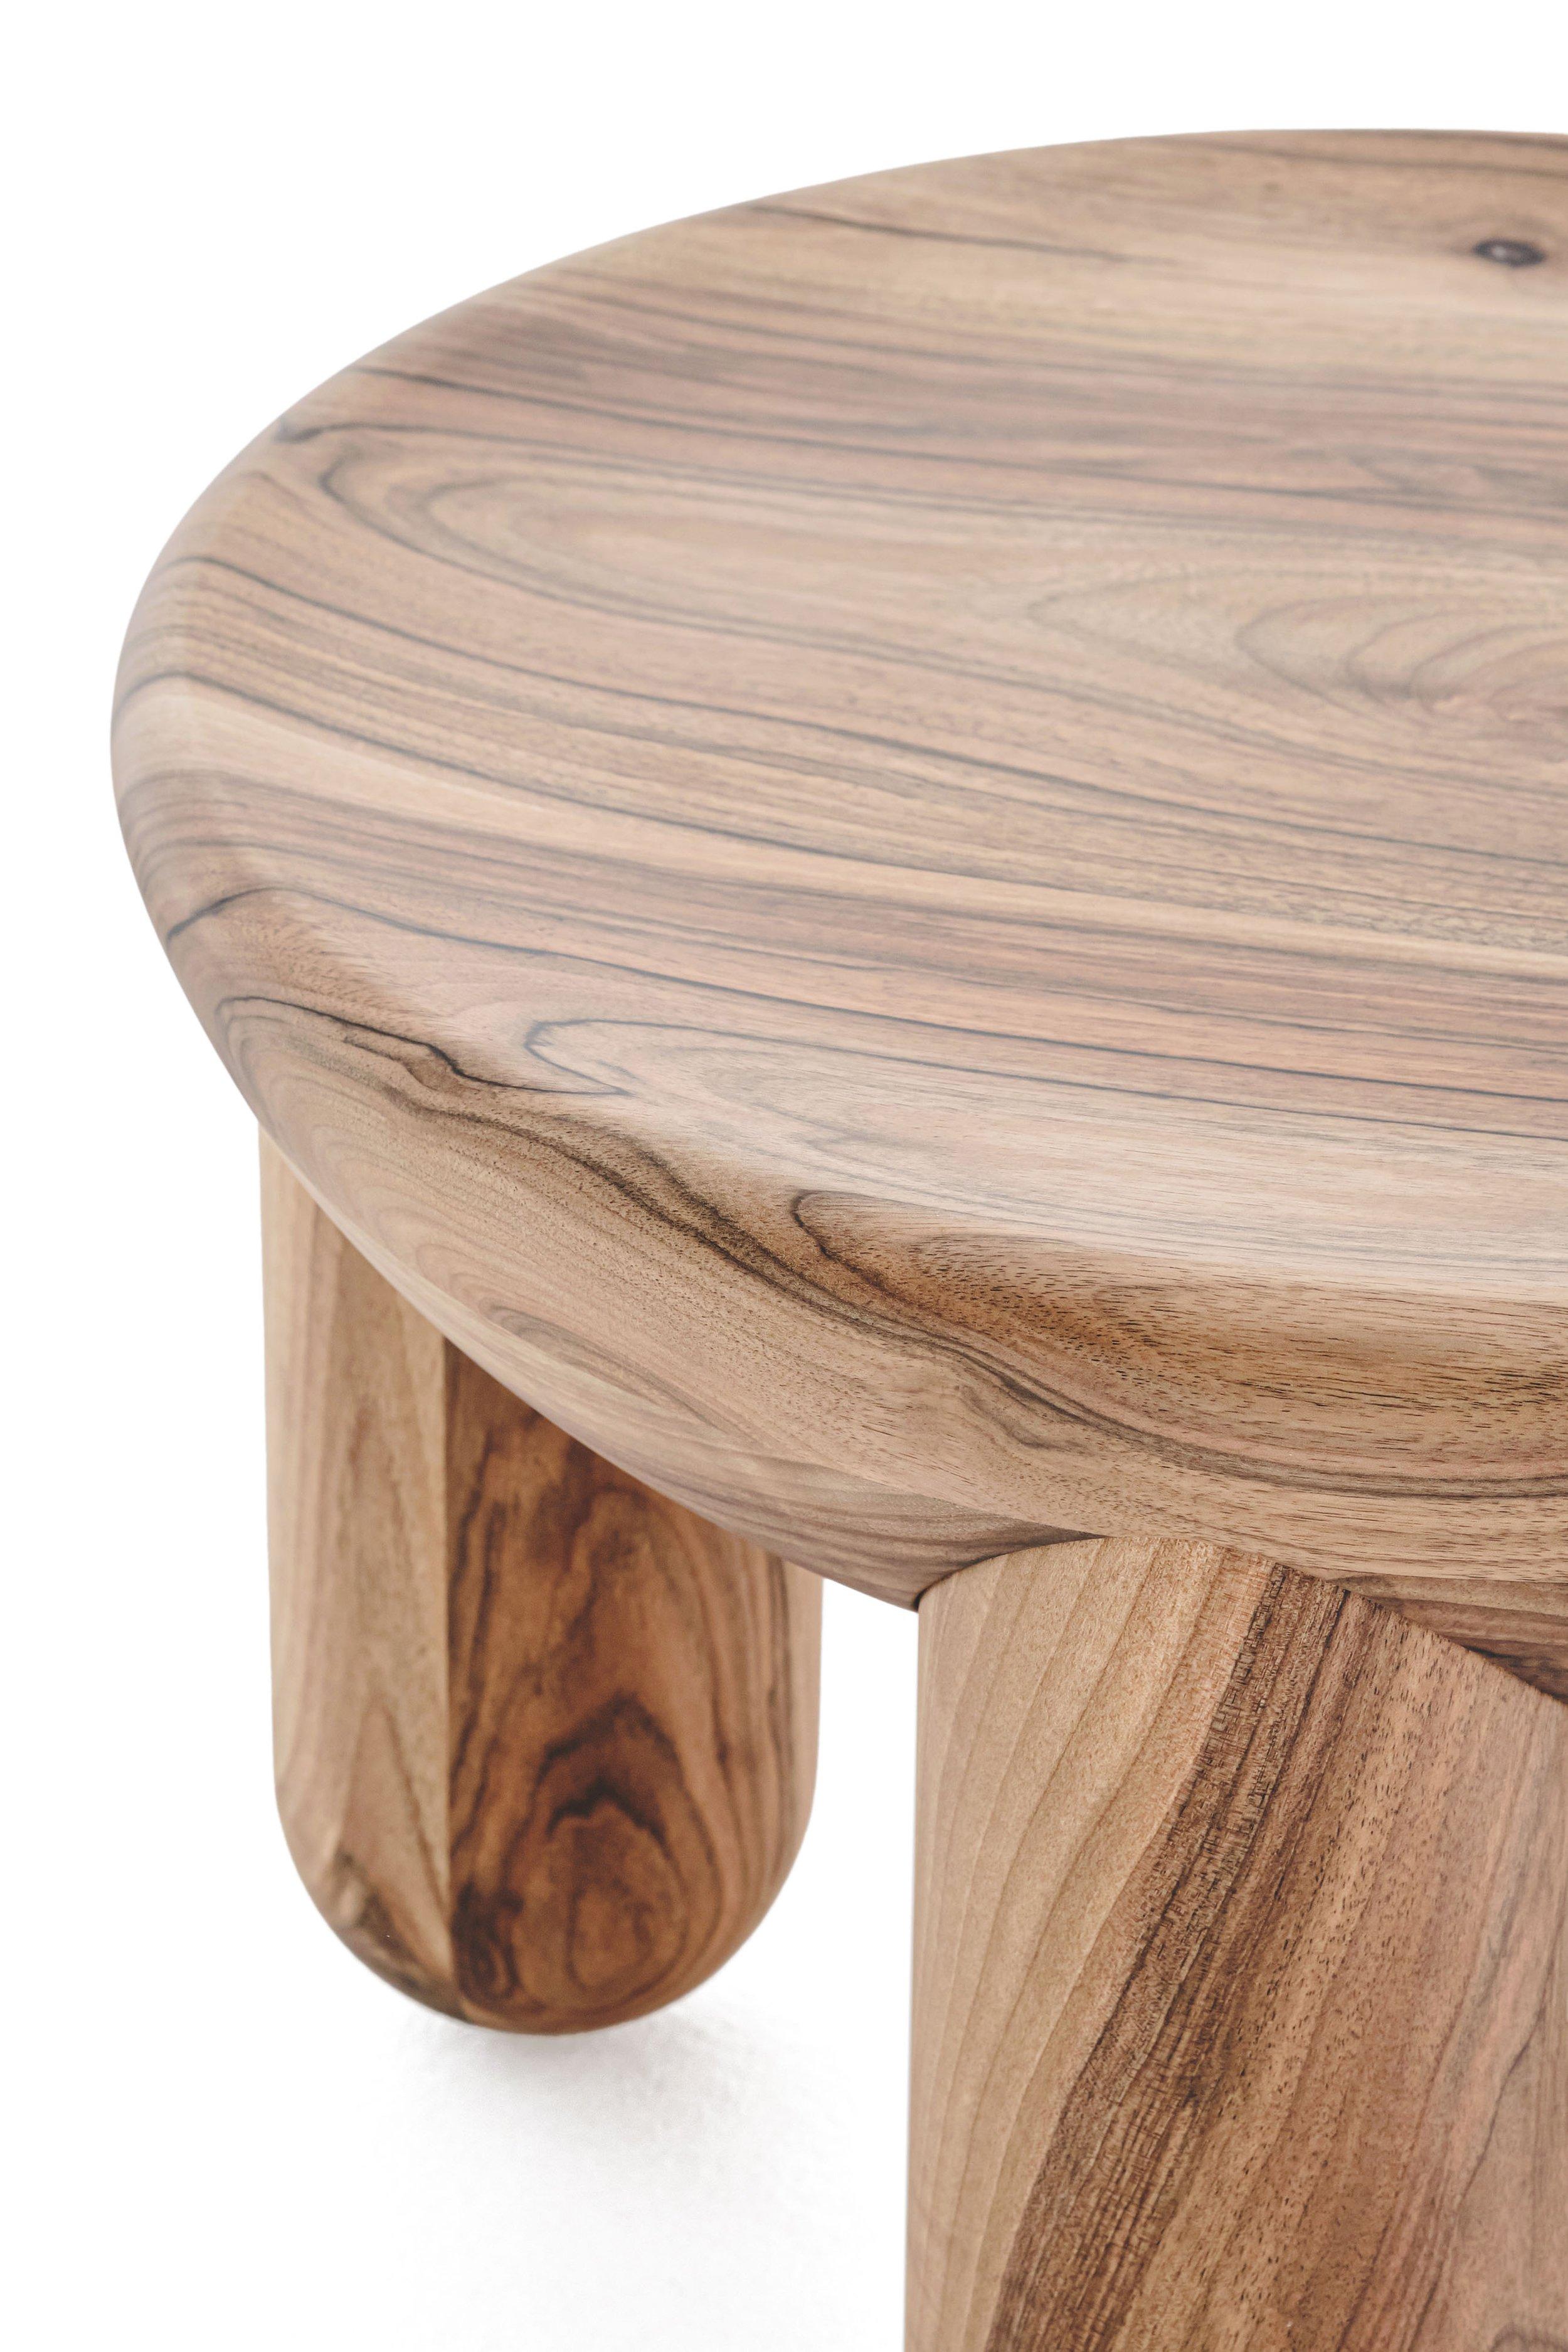 Coffee Table 'Freyja 1' by Noom
Signed by Kateryna Sokolova

- Dimensions: H. 30 cm, Ø 44 cm

Other woods and finishes available: 
Woods: Ashwood, Walnut, Thermo Ash, Thermo Oak
Ash wood finishes: Black stained, Brown stained, Natural

Model shown: